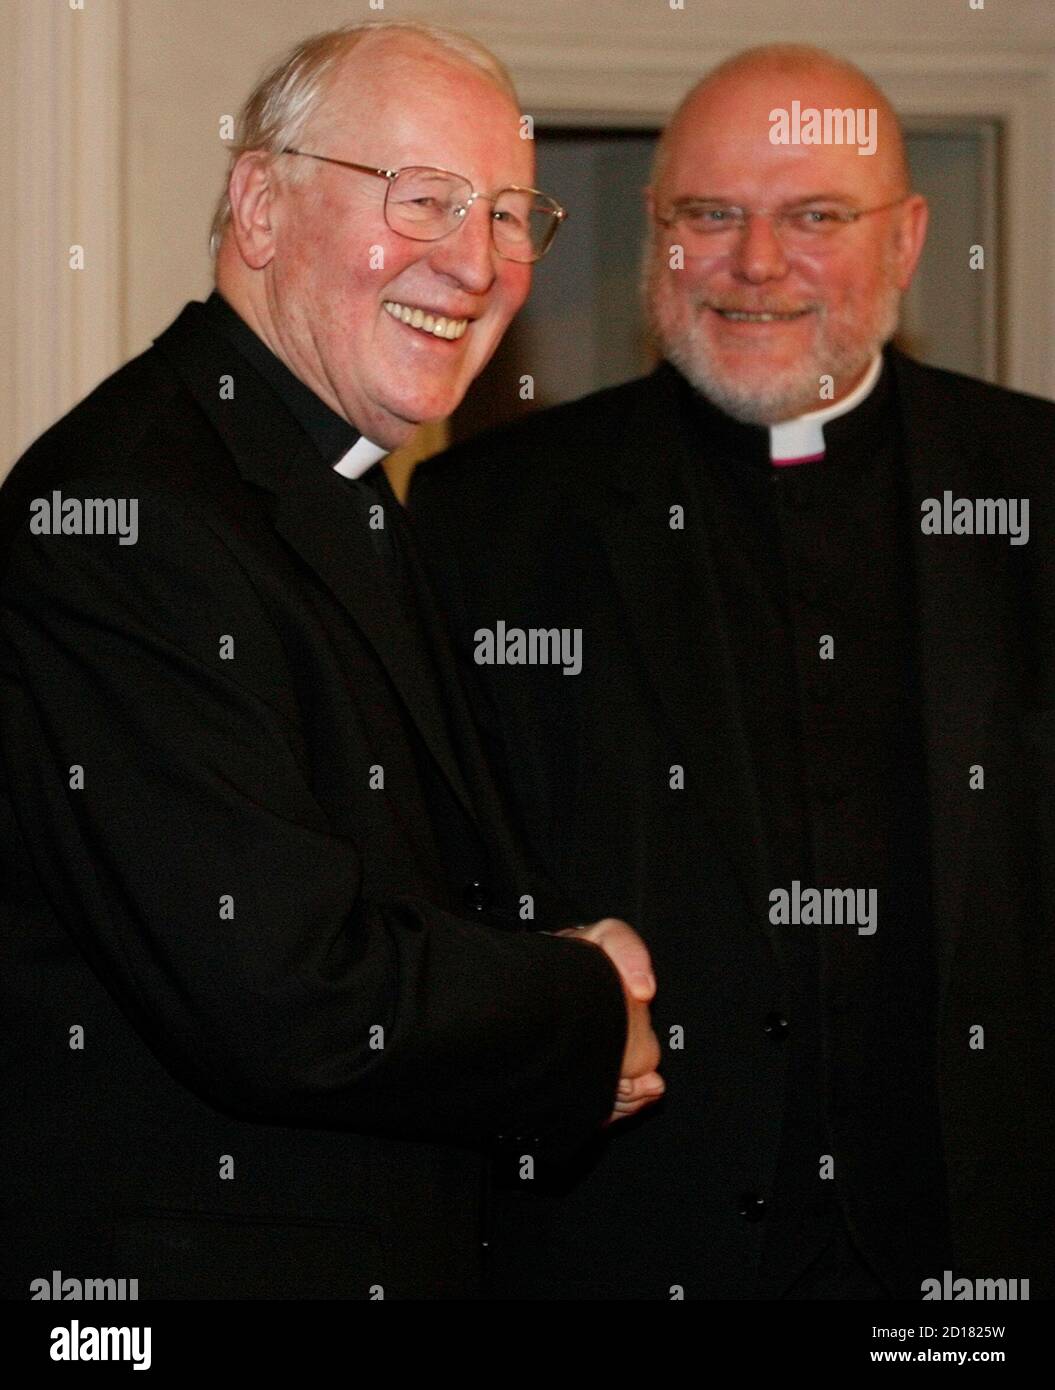 Reinhard Marx Bishop of Trier and Munich's Cardinal and archbishop Friedrich Wetter (R) pose for the media in Munich December 6, 2007. Marx will be the successor of Wetter after Pope Benedict XVI granted the request of Wetter for resignation.  REUTERS/Michael Dalder    (GERMANY) Stock Photo